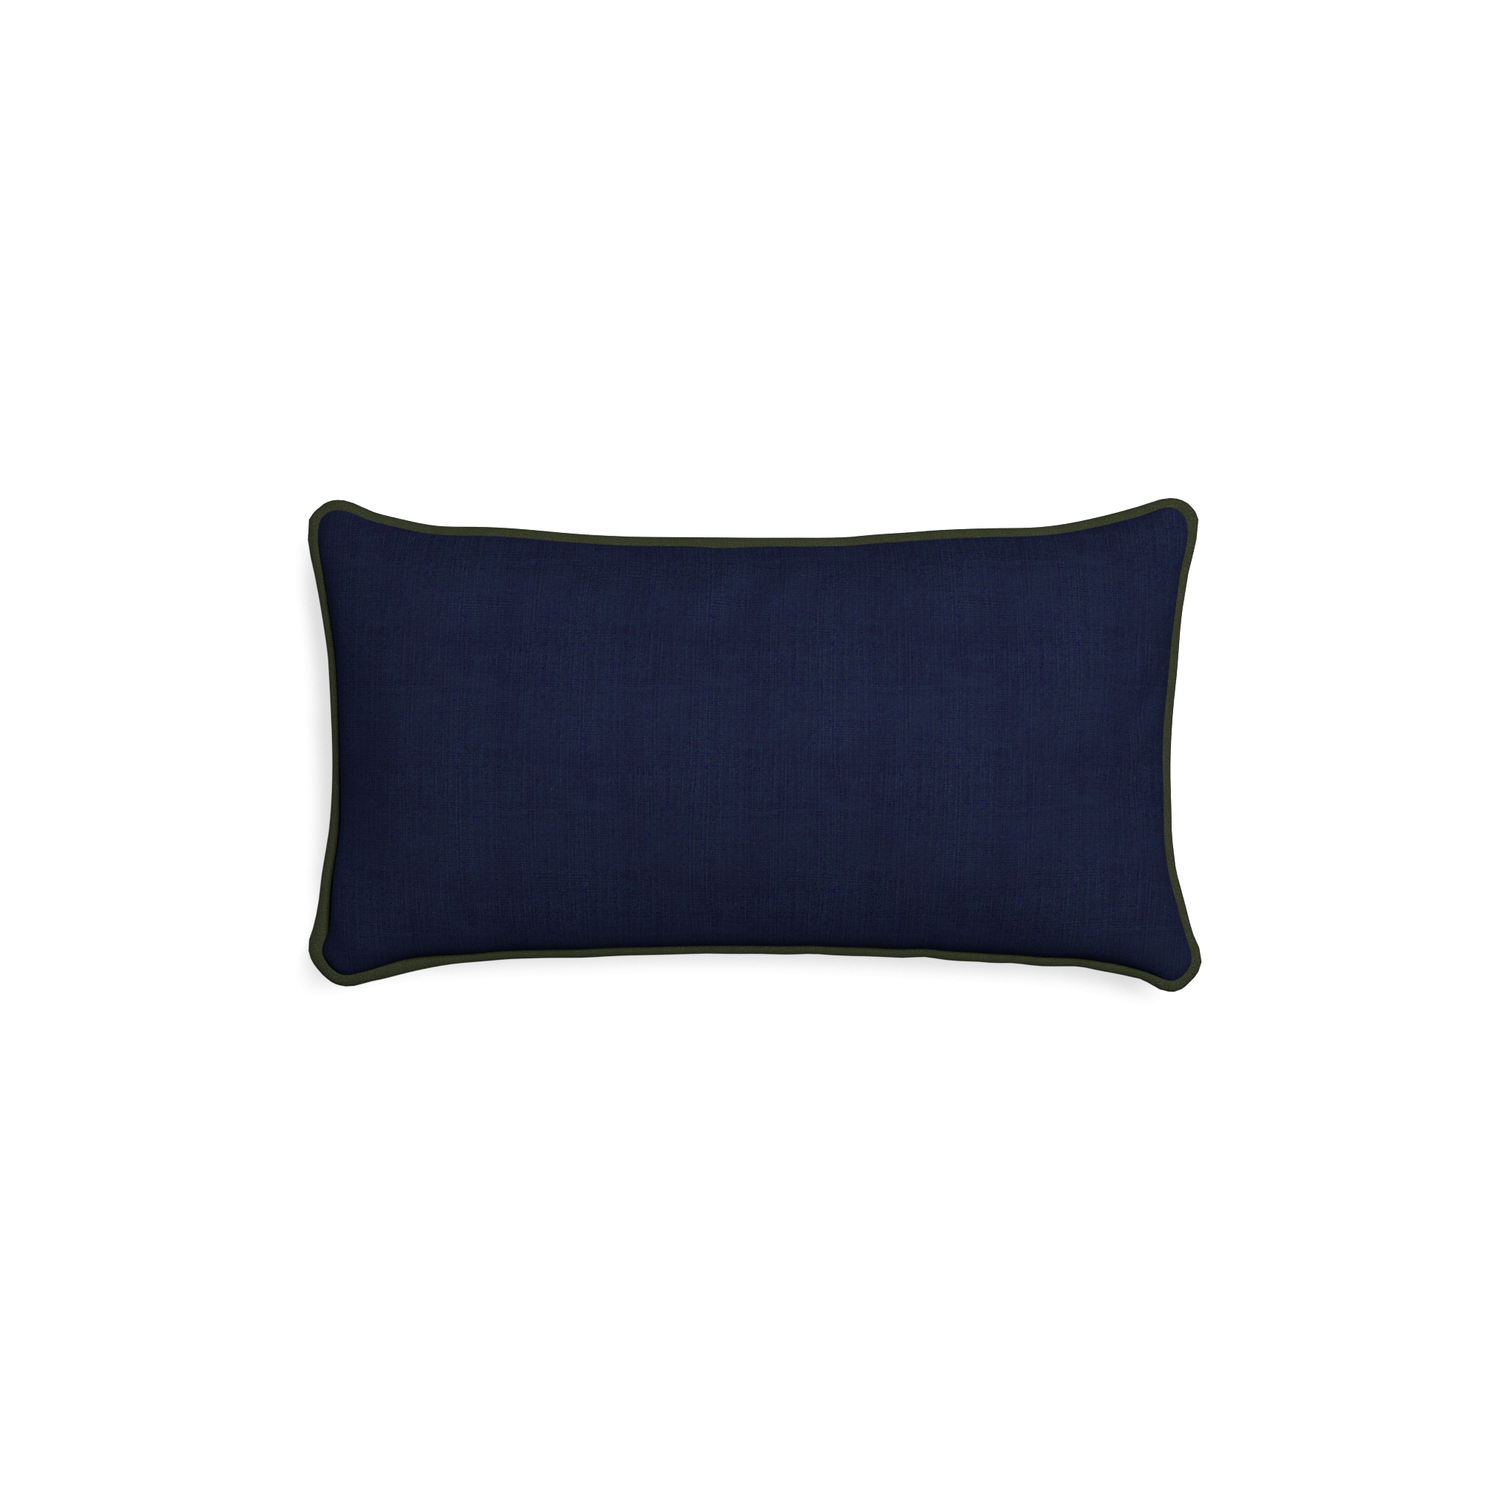 Petite-lumbar midnight custom navy bluepillow with f piping on white background